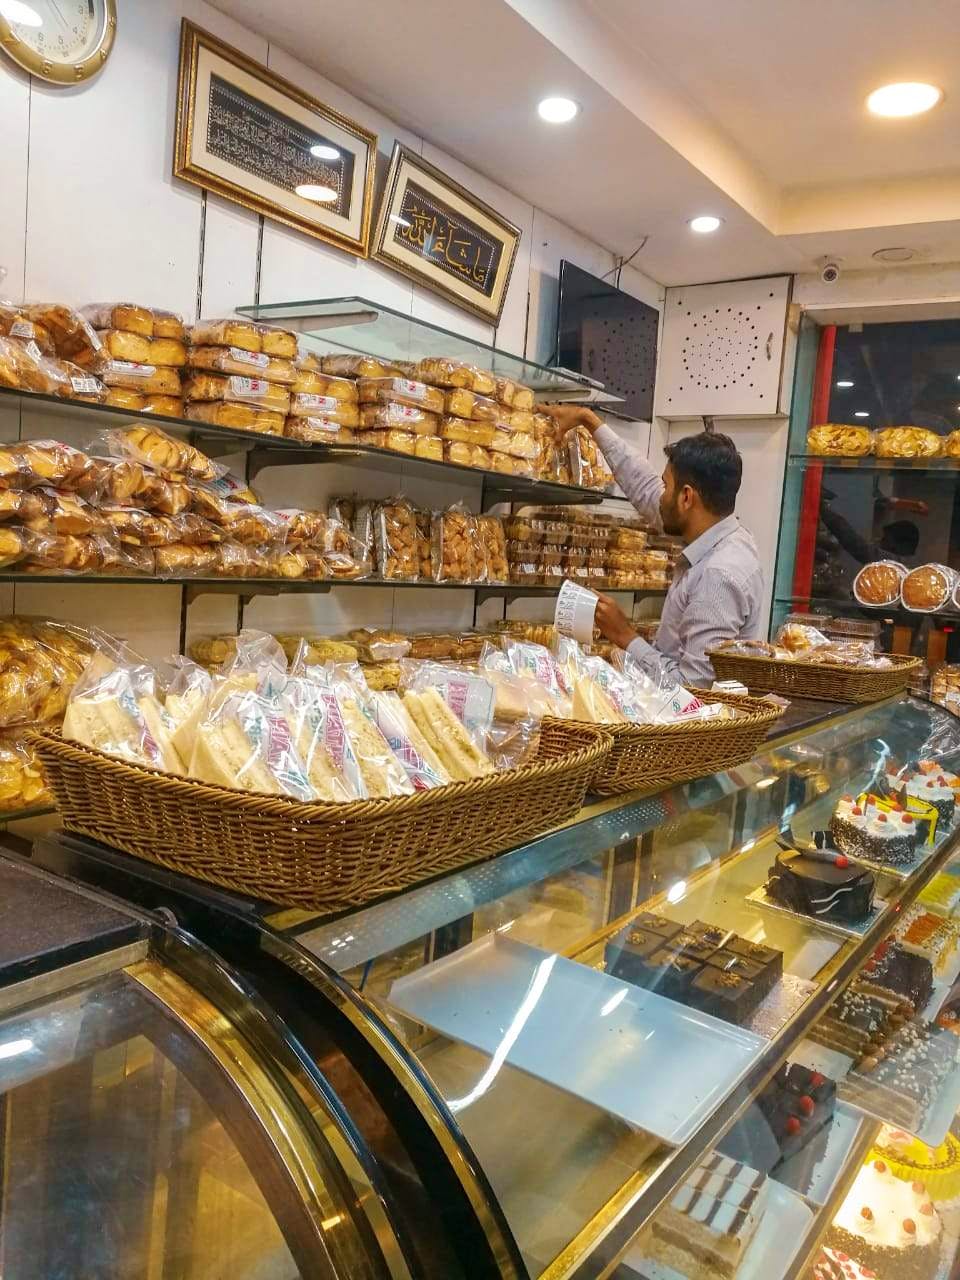 Bakery,Pâtisserie,Food,Delicatessen,Cuisine,Delicacy,Pastry,Snack,Business,Dish